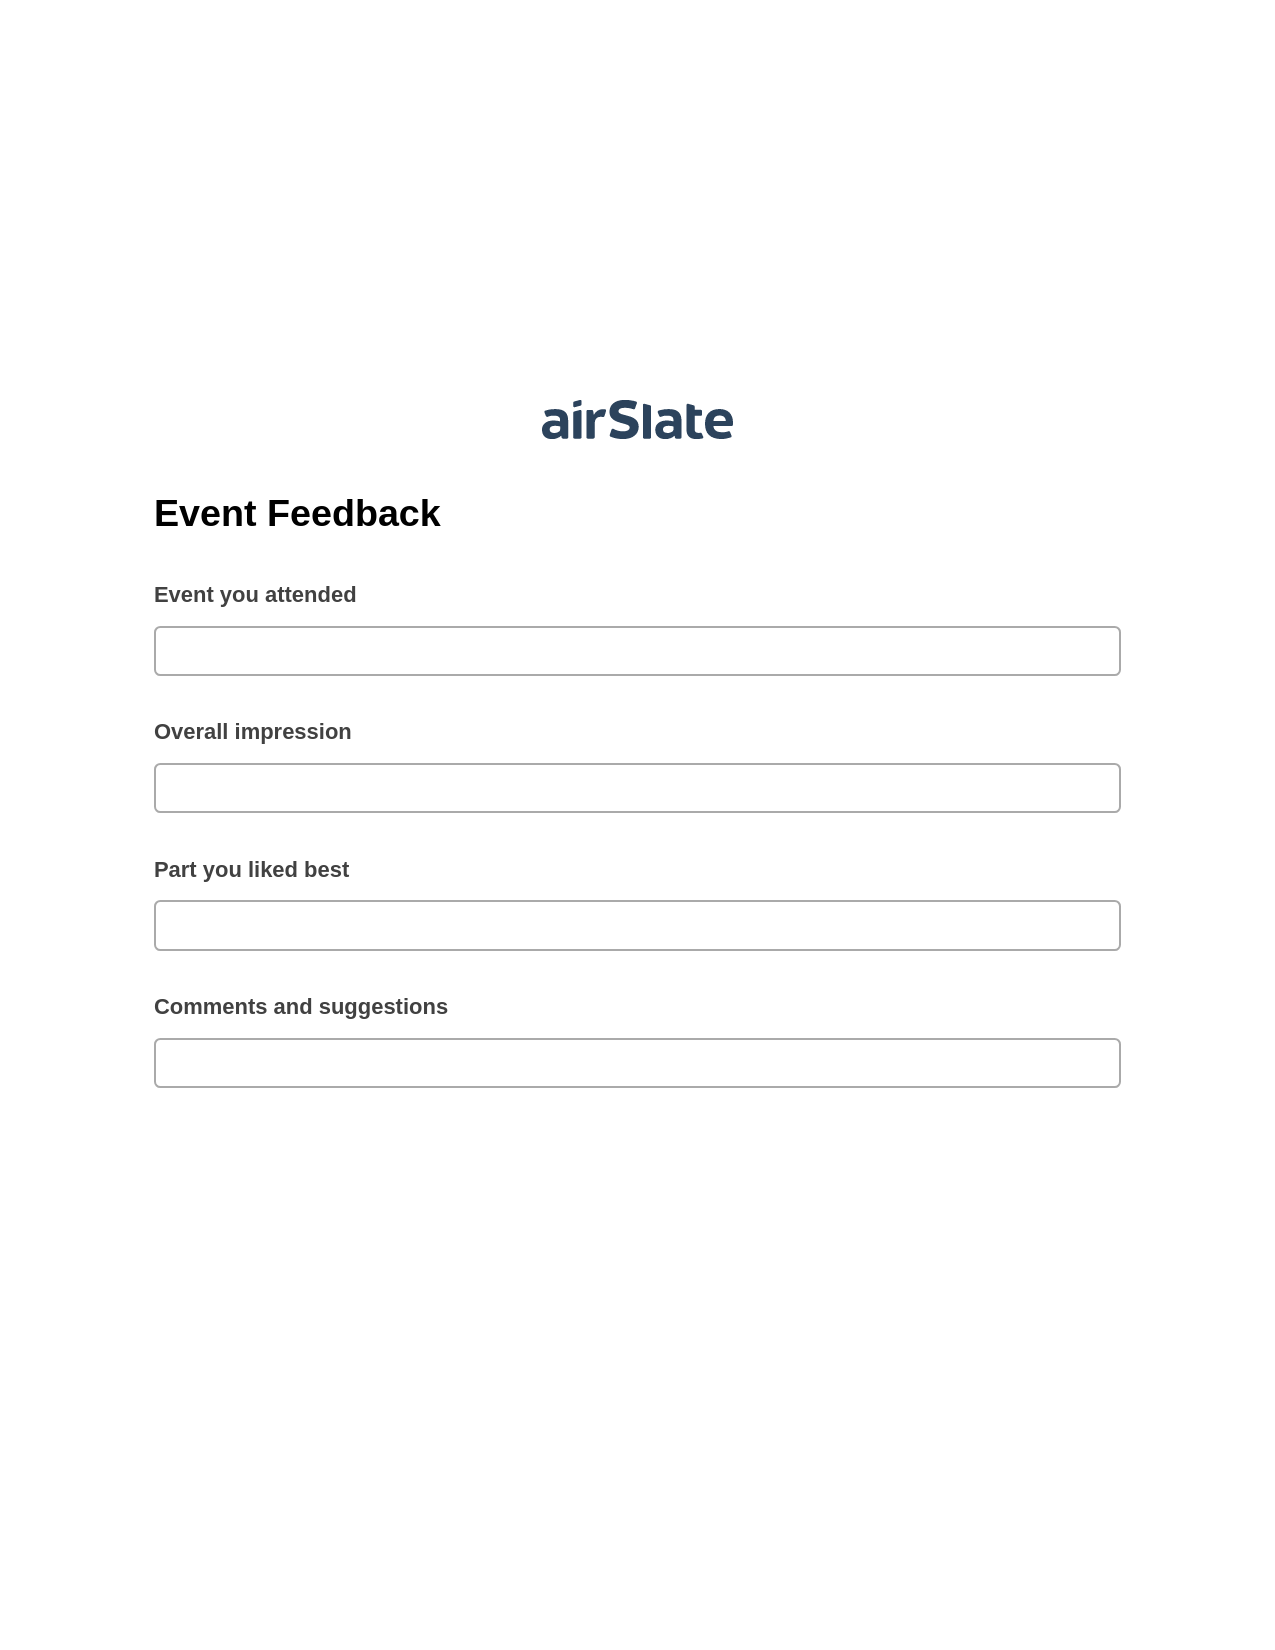 Event Feedback Pre-fill from Salesforce Record Bot, Lock the slate bot, Webhook Postfinish Bot